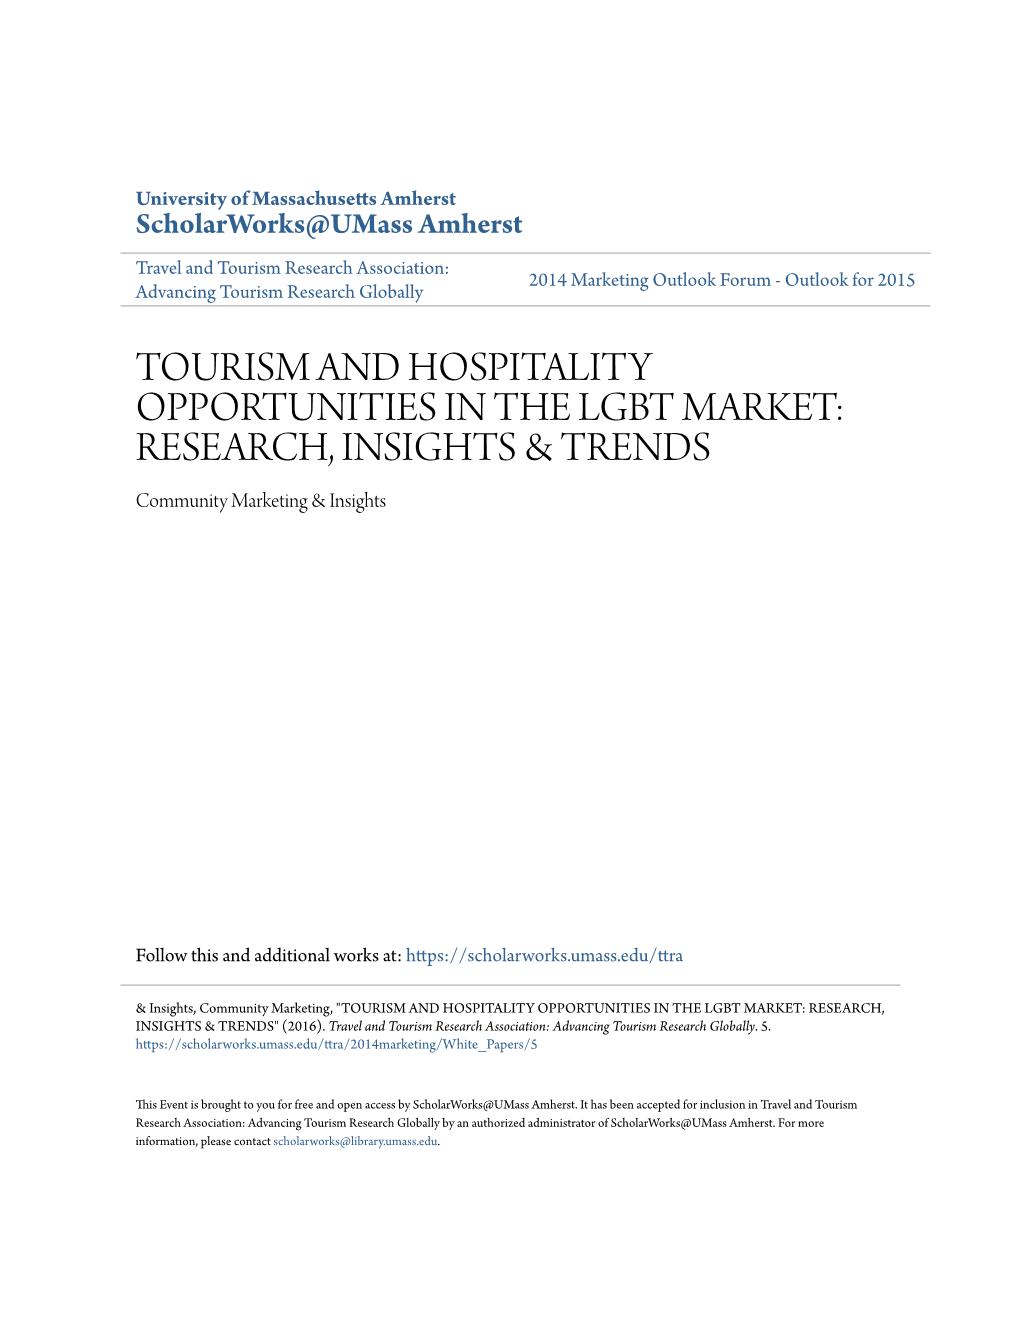 TOURISM and HOSPITALITY OPPORTUNITIES in the LGBT MARKET: RESEARCH, INSIGHTS & TRENDS Community Marketing & Insights